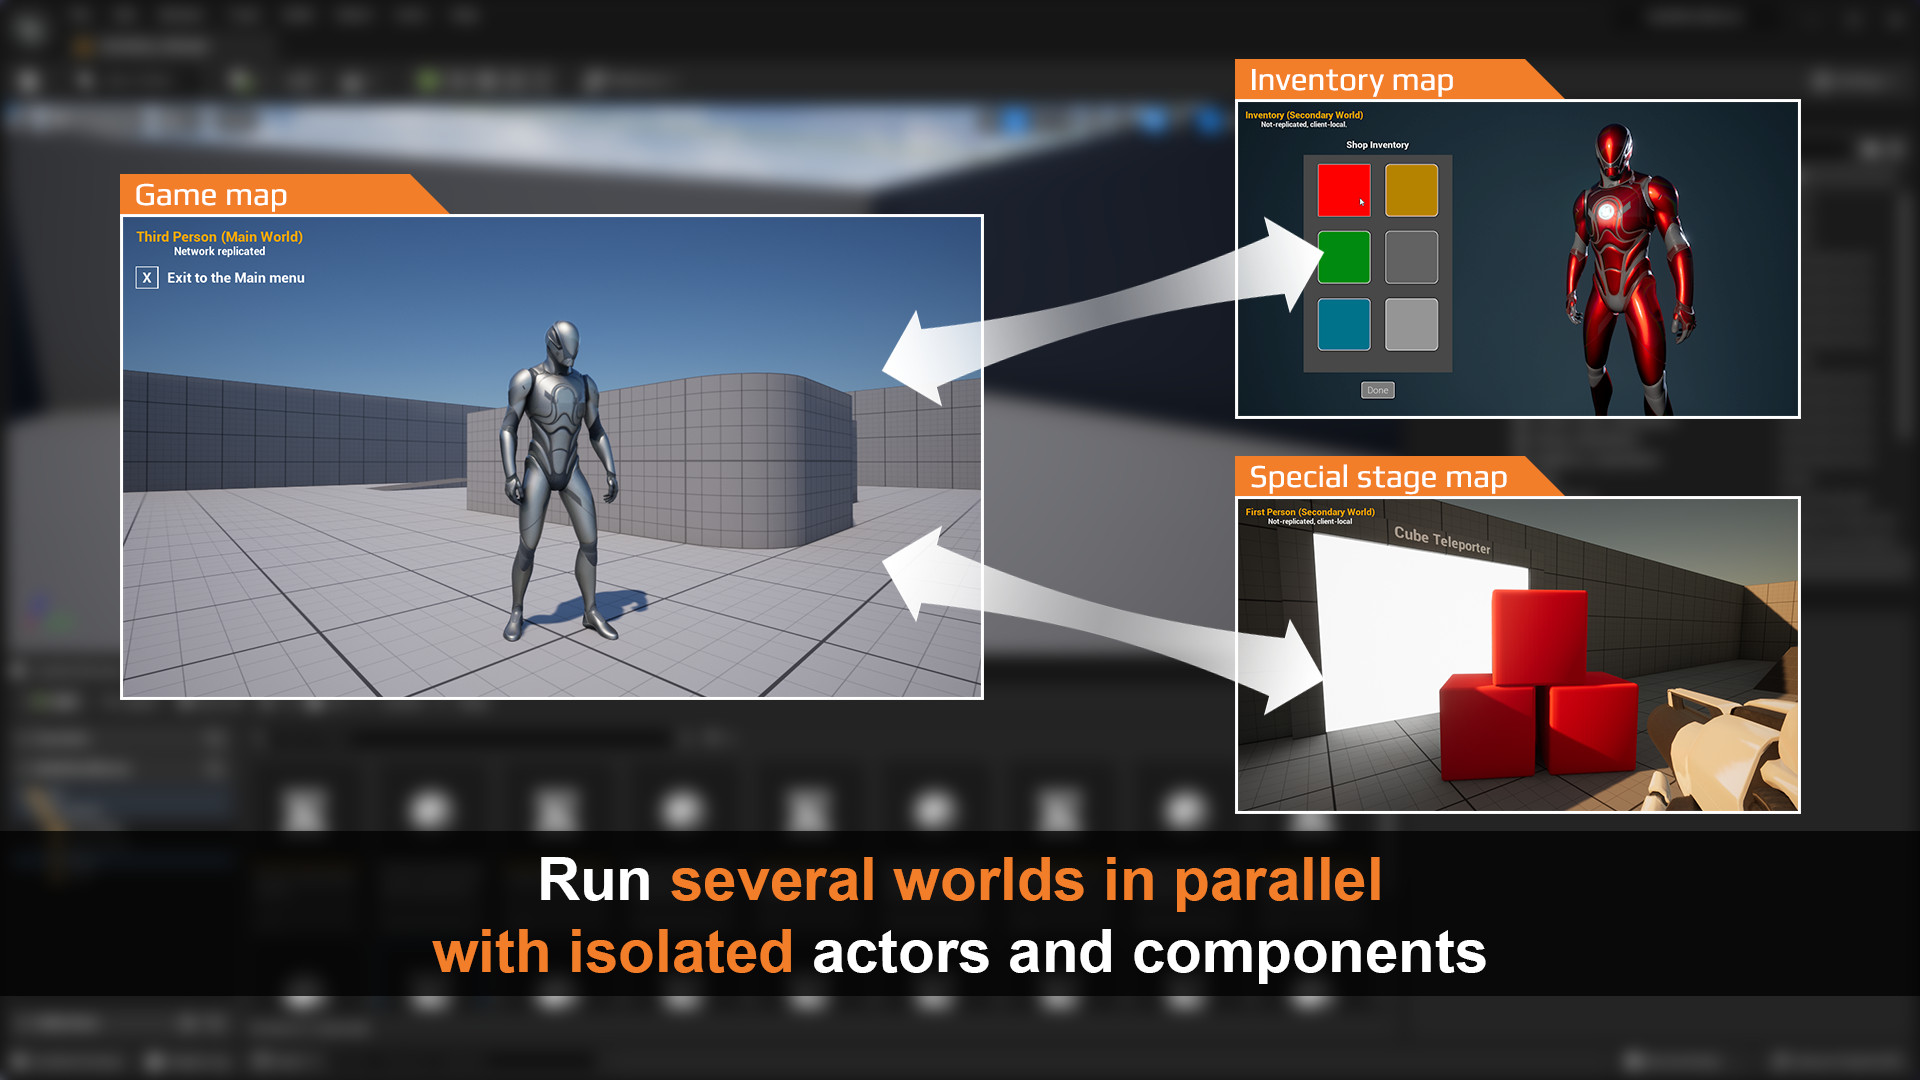 Run several worlds in parallel, with isolated actors and components.